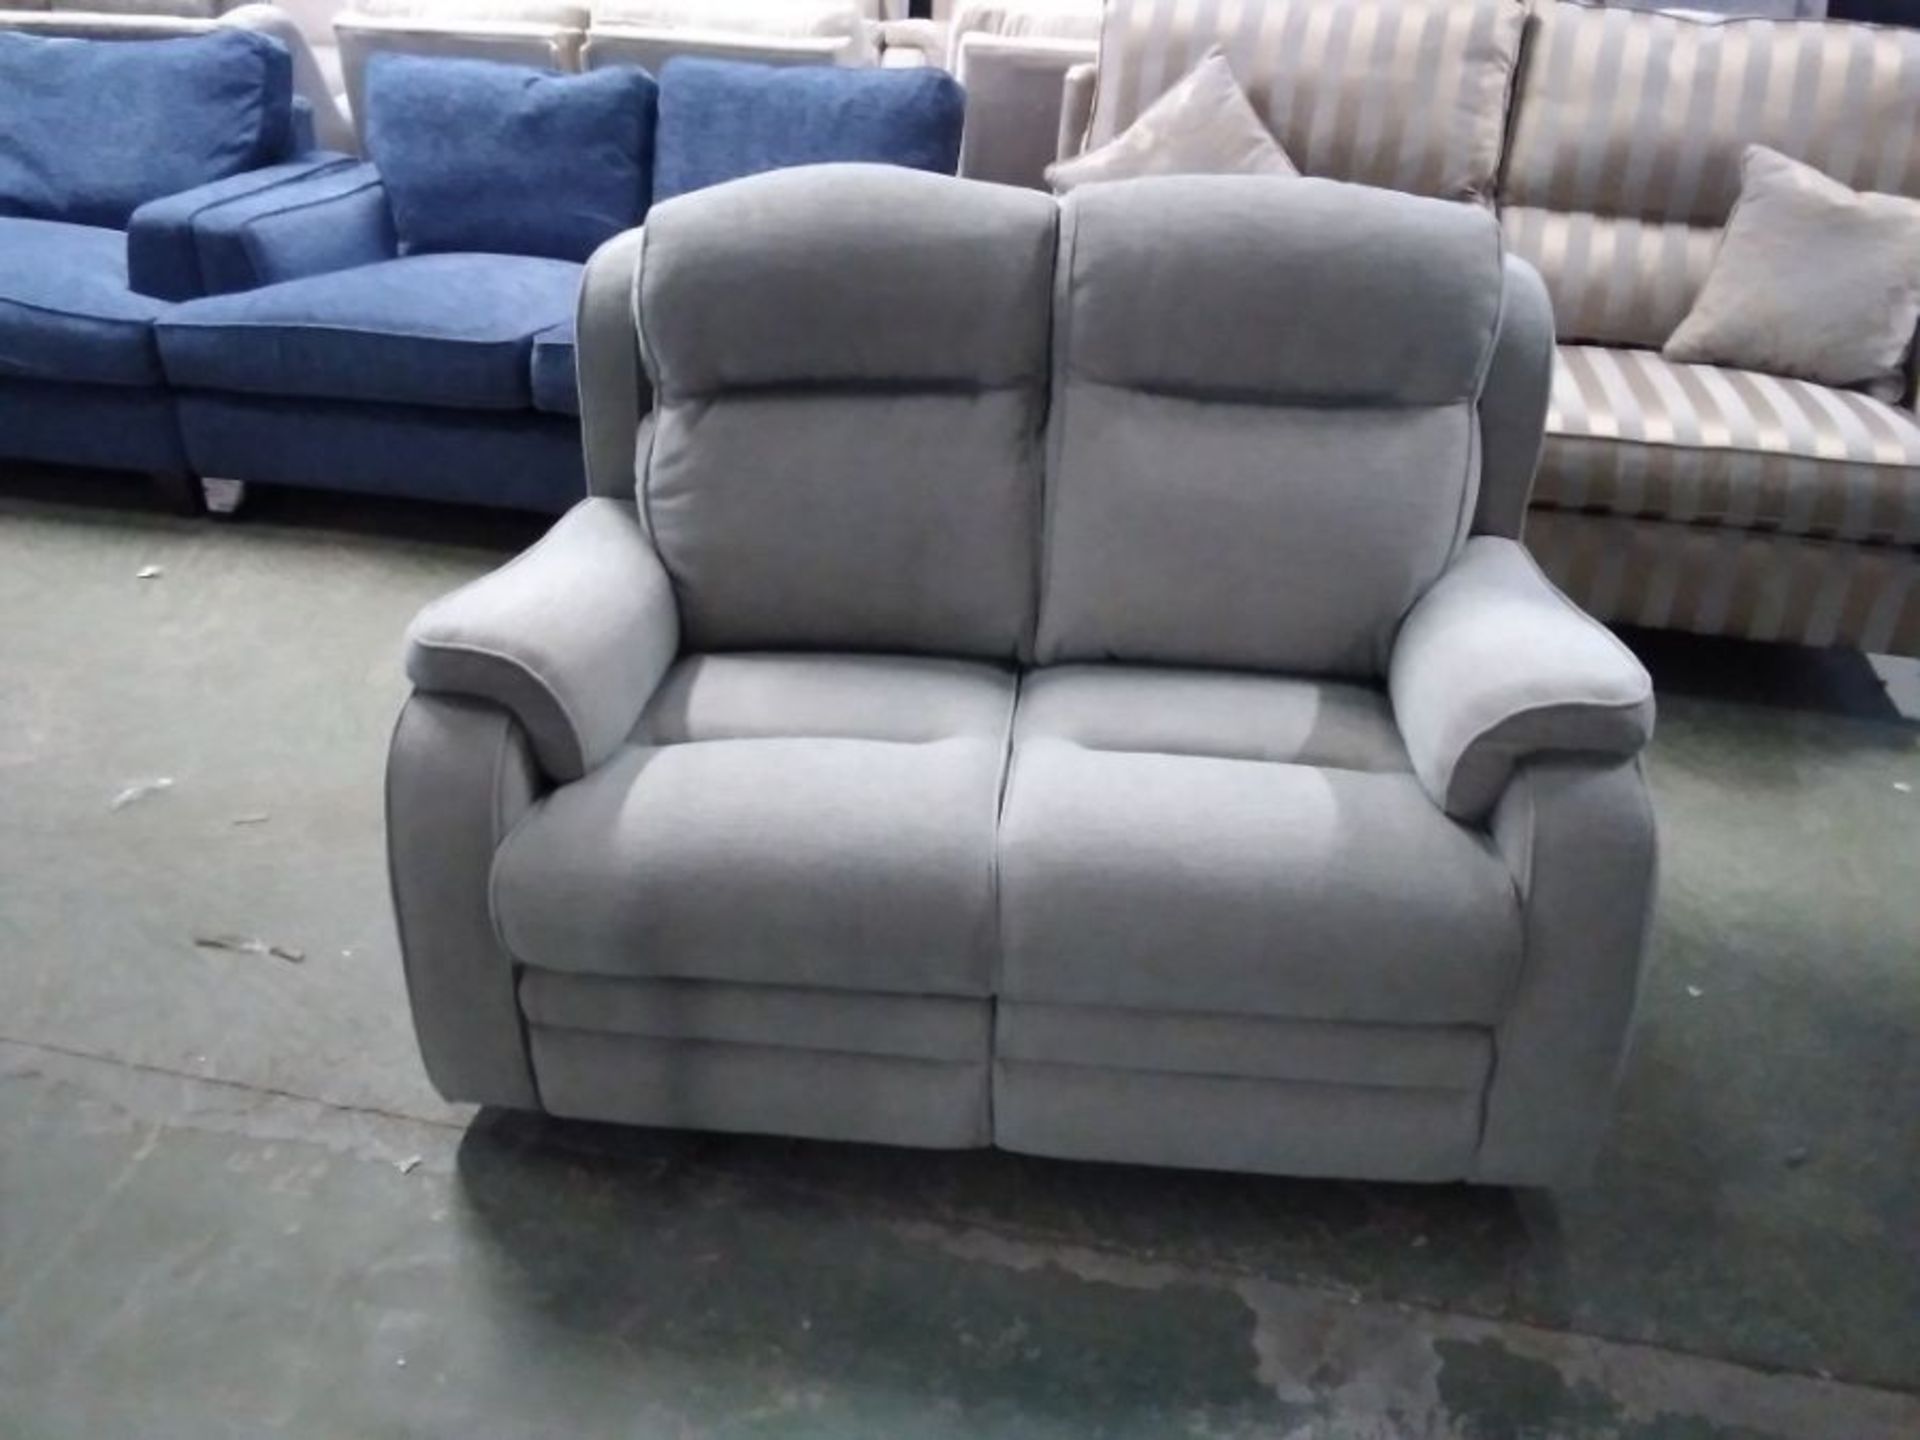 TEAL PATTERNED HIGH BACK 2 SEATER SOFA (TROO2898-W